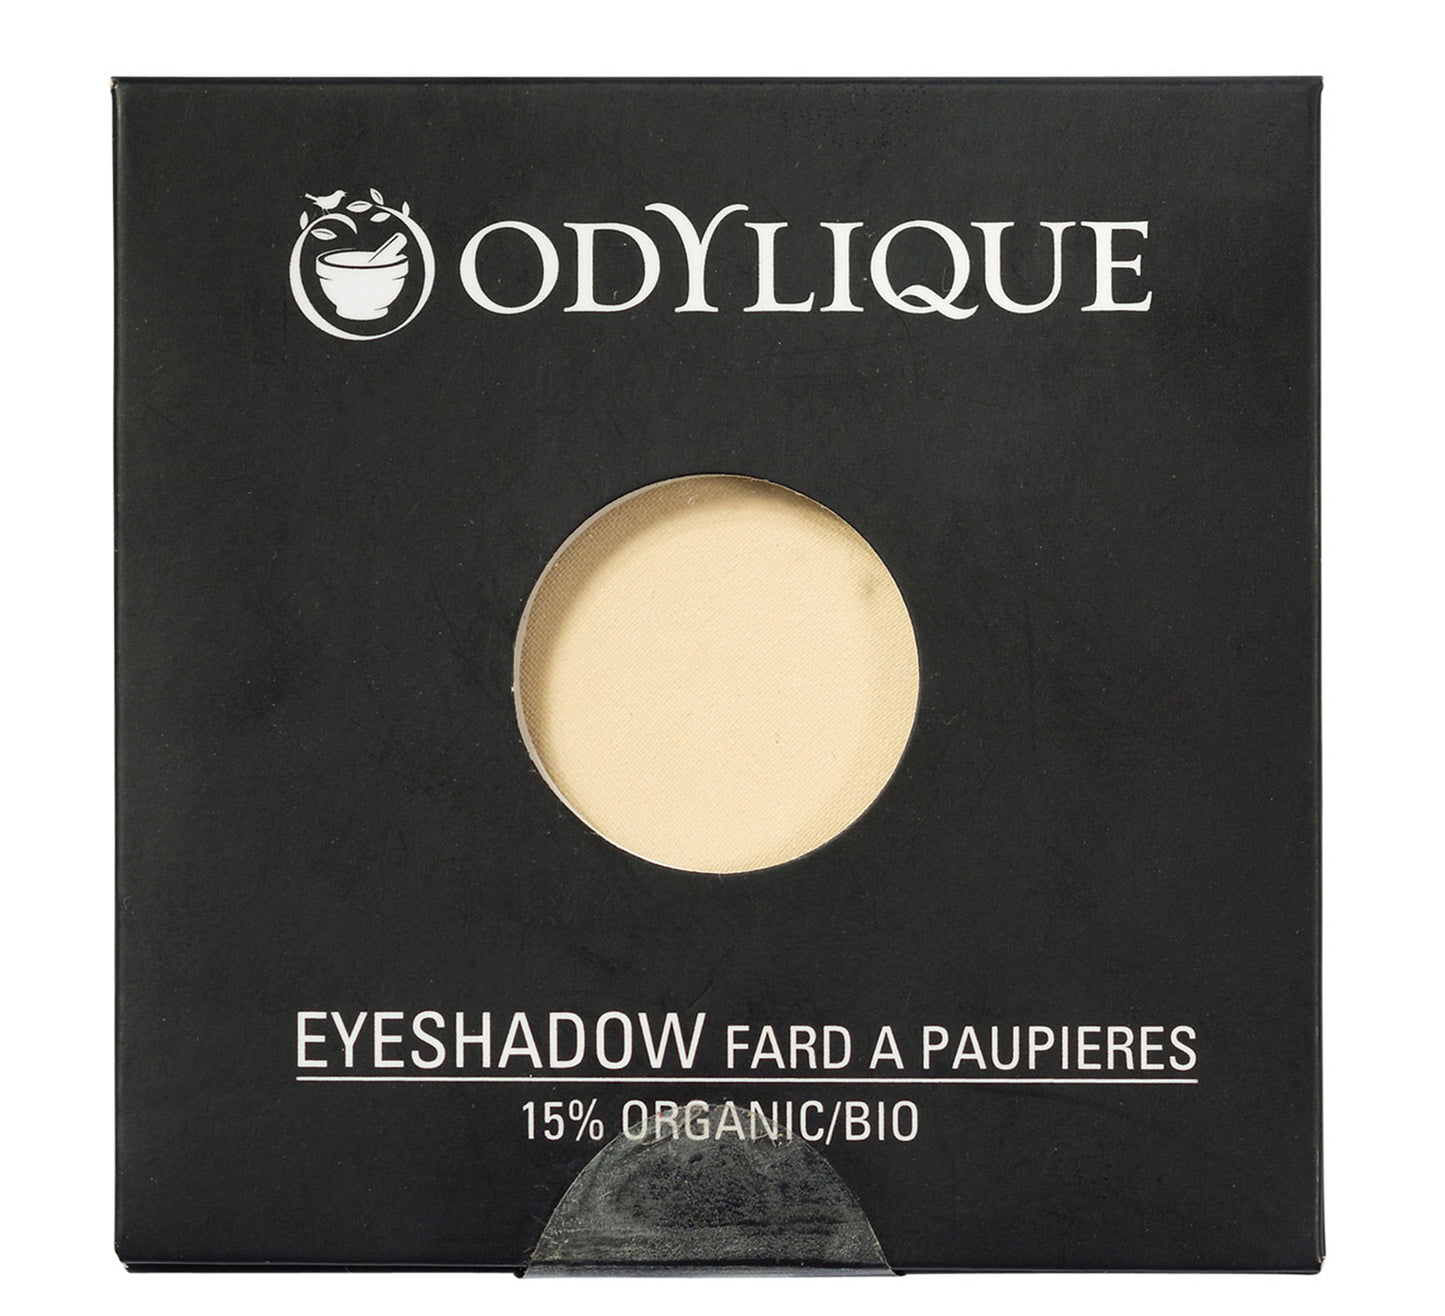 Single pan Odylique organic eyeshadow in shade Sand, placed in its black packaging.